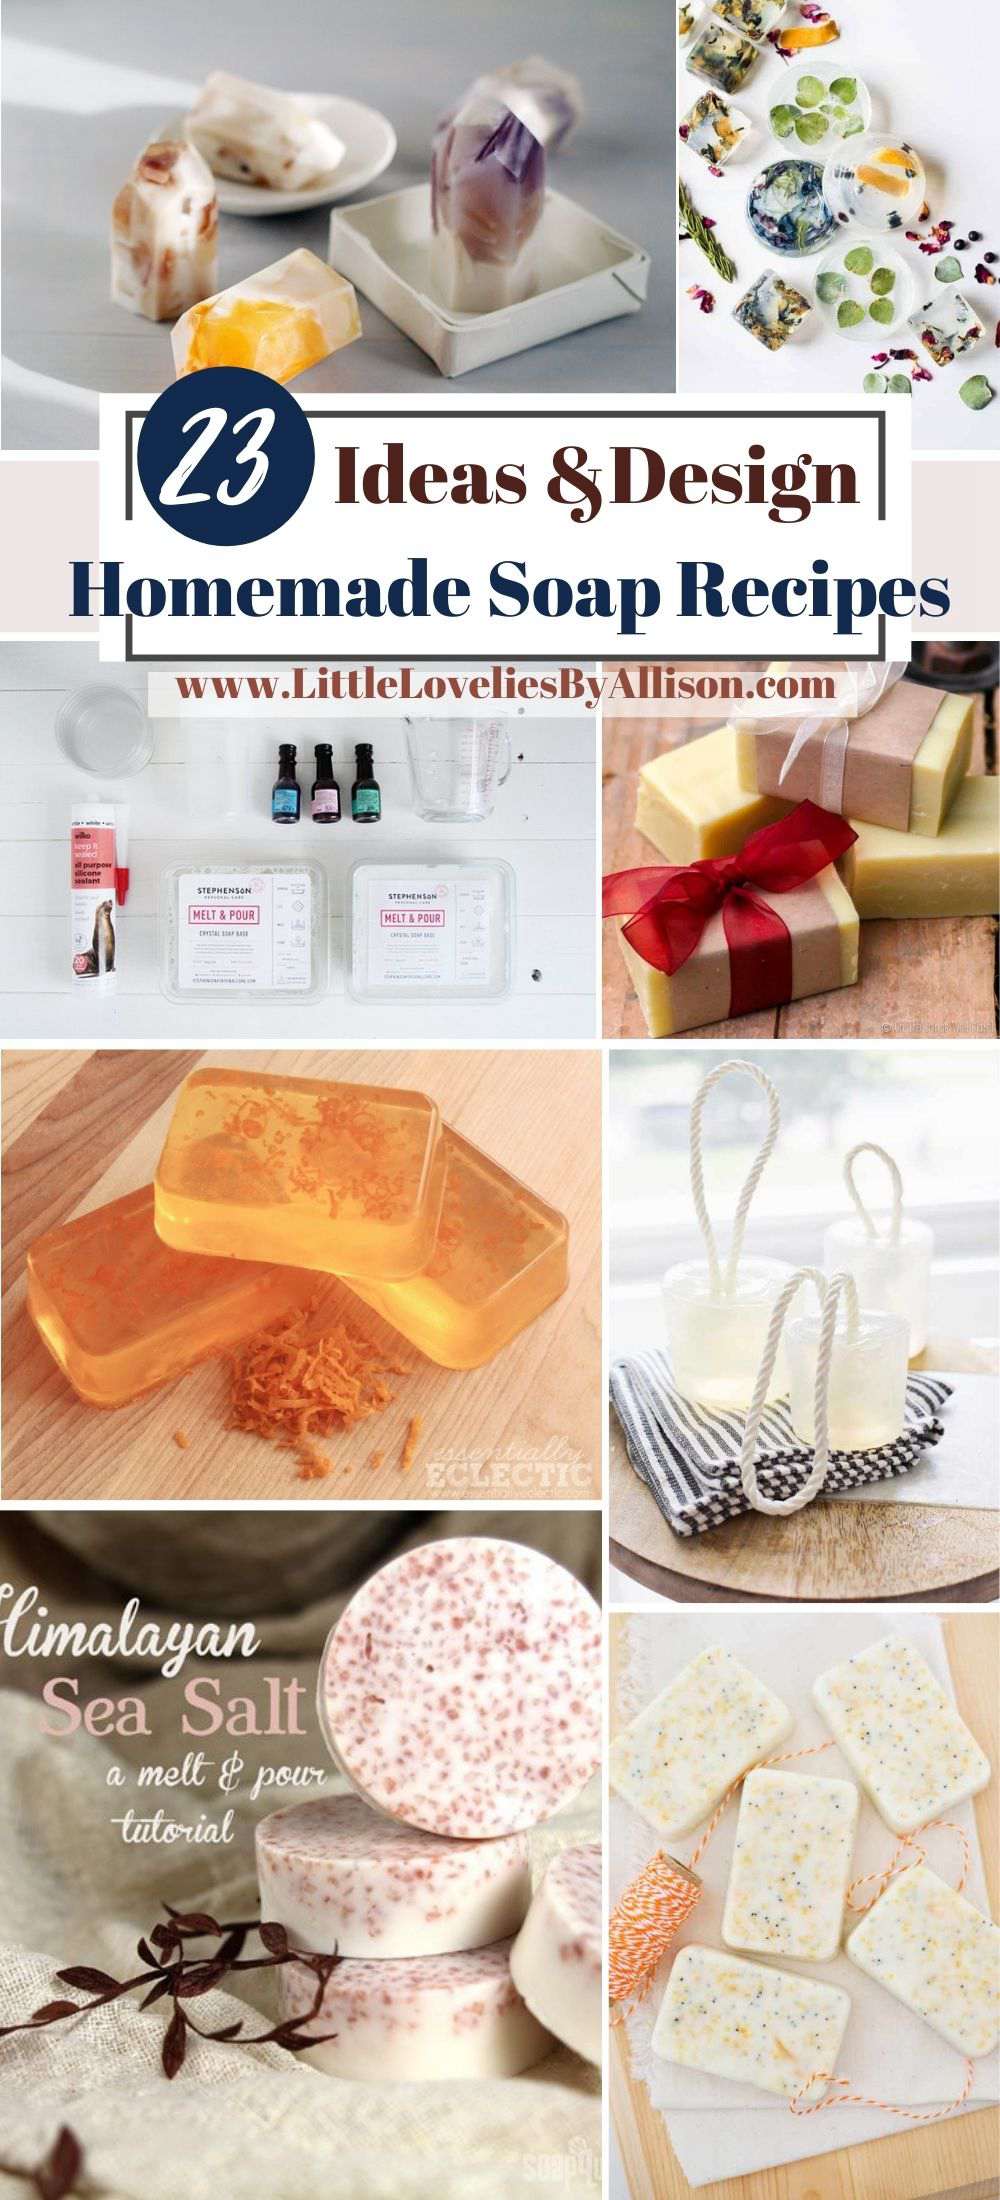 23 DIY Homemade Soap Recipes for Almost Anyone